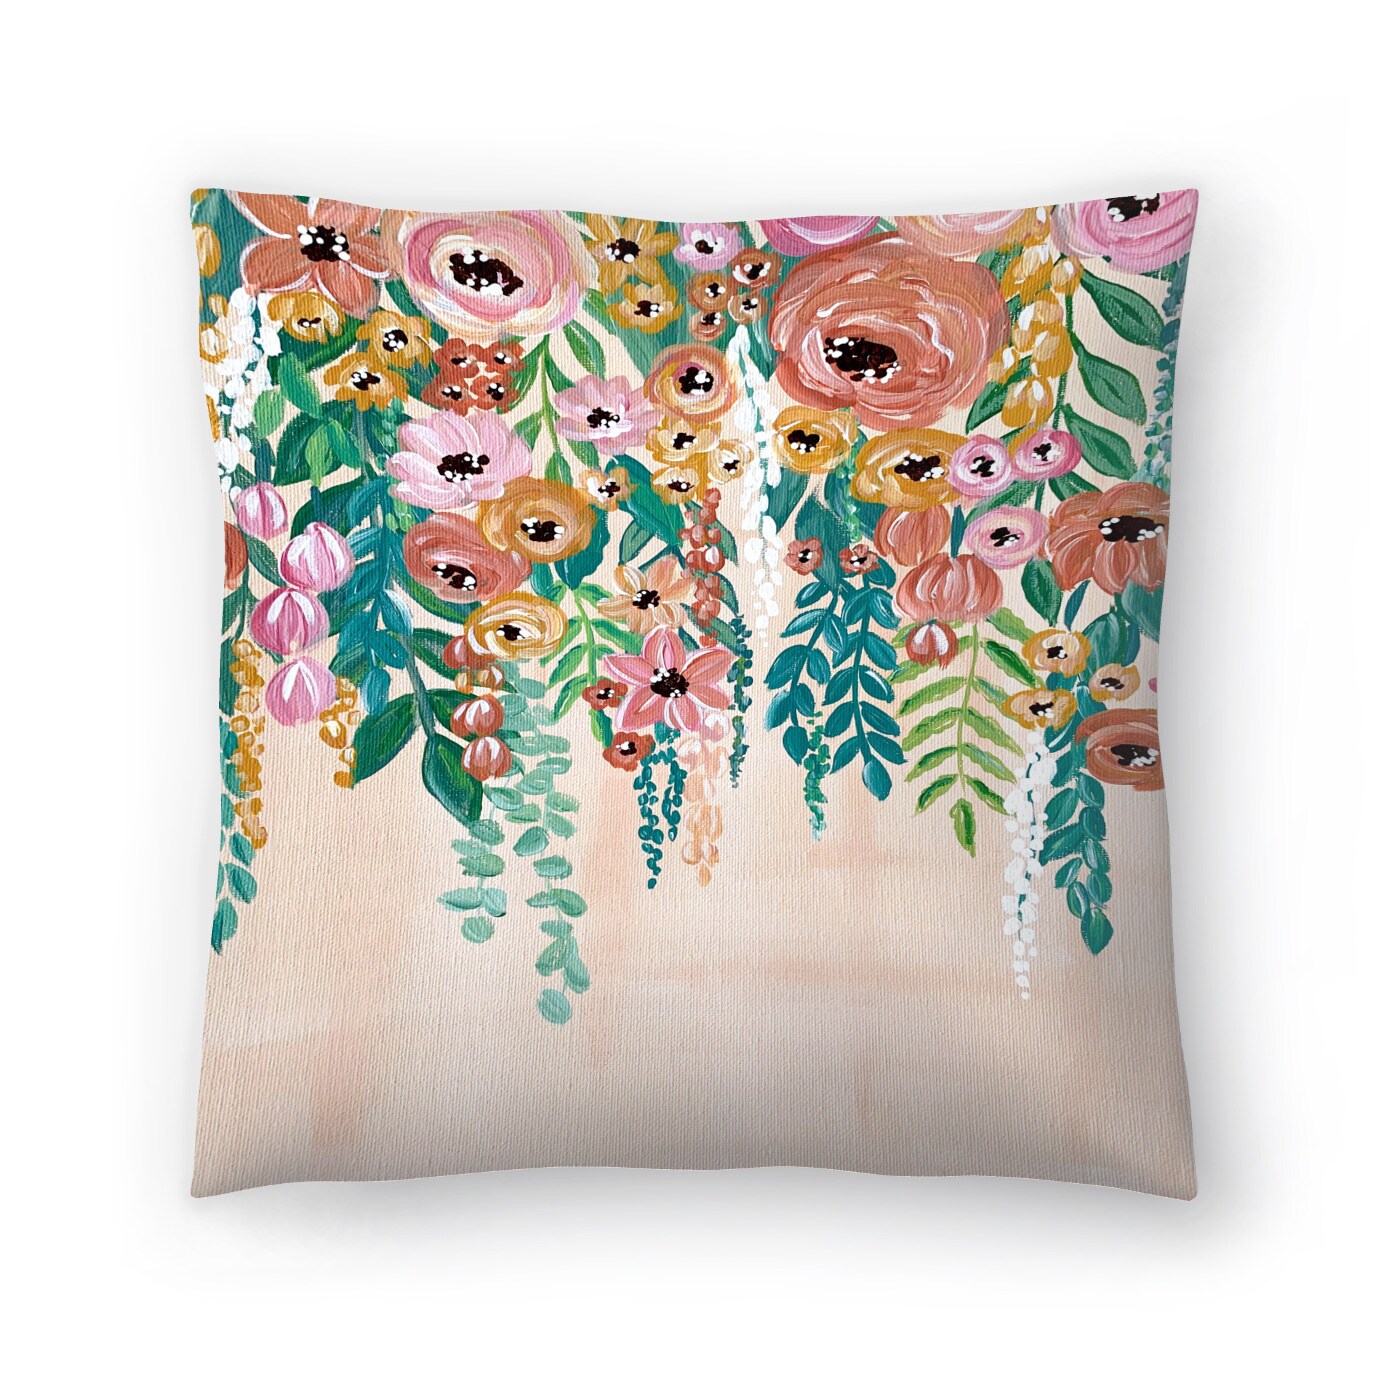 Hanging Flowers Throw Pillow By Elyse Burns Americanflat Decorative Pillow